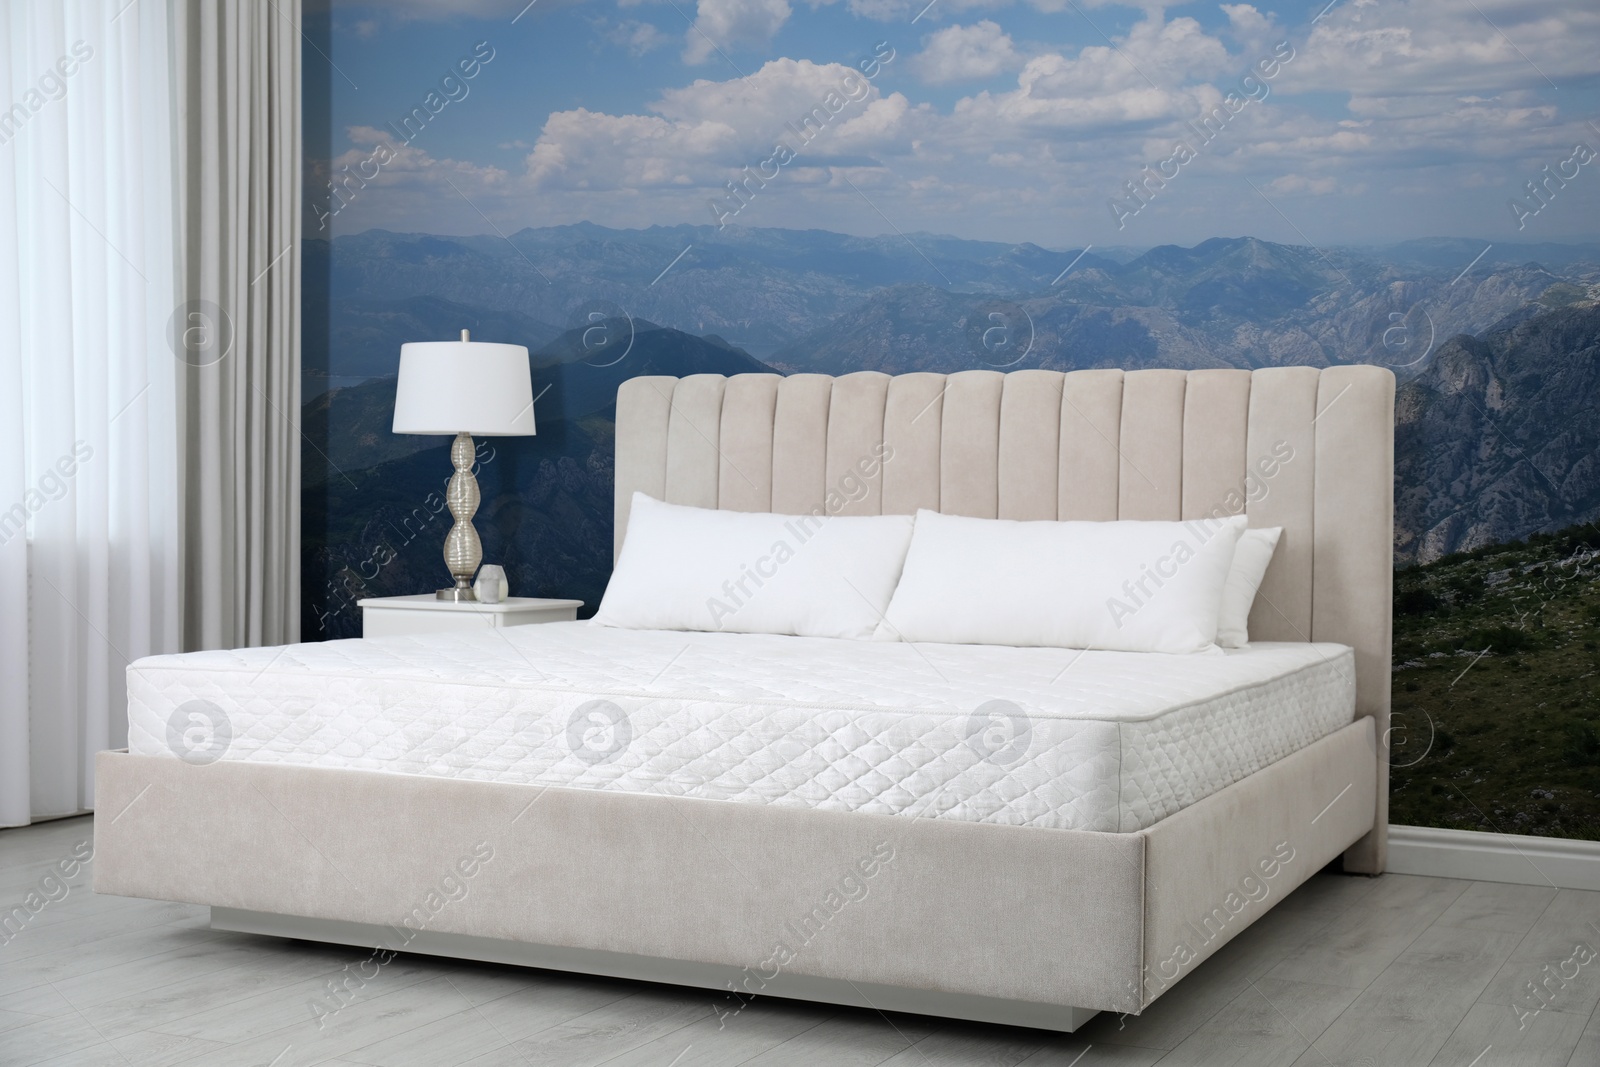 Image of Stylish interior with large bed and mountain landscape wallpapers